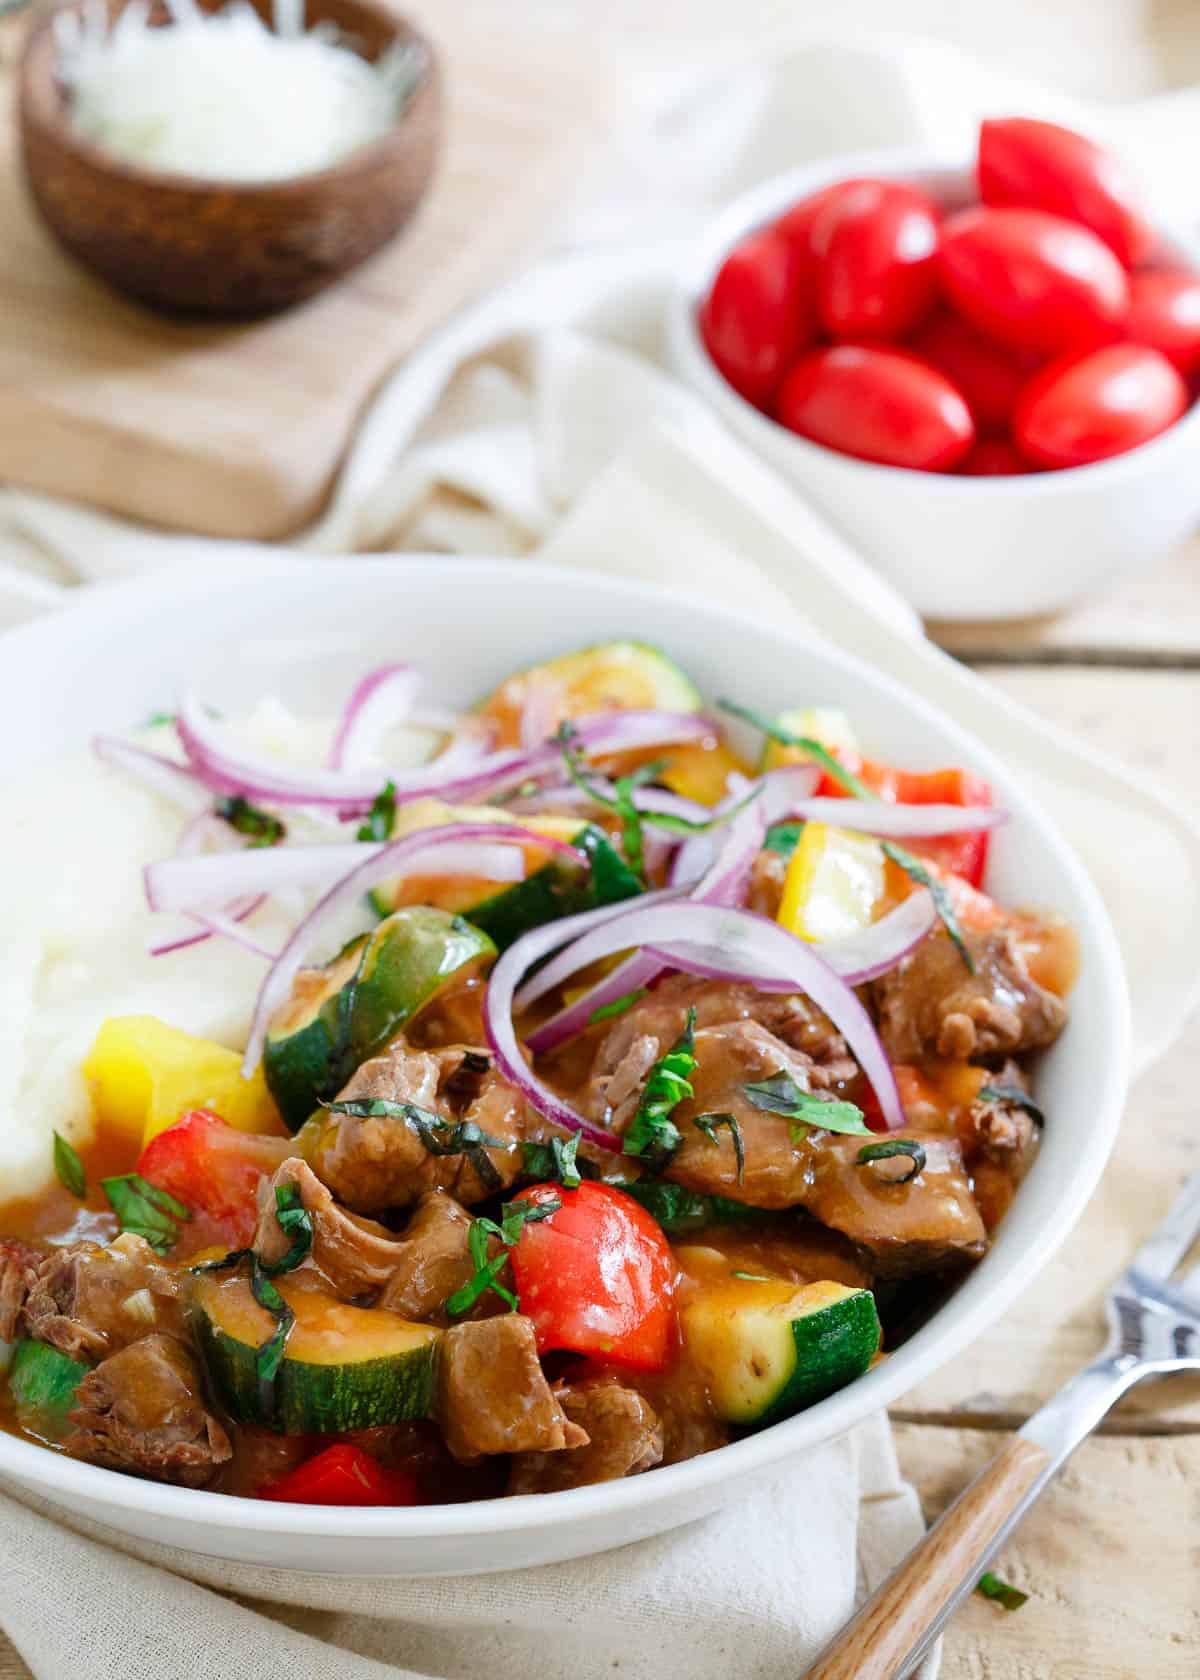 This summer beef stew is made in the slow cooker so the house stays cool. Enjoy this classic dish with a summer vegetable twist! / This summer beef stew is made in the slow cooker so the house stays cool. Enjoy this classic dish with a summer vegetable twist!
